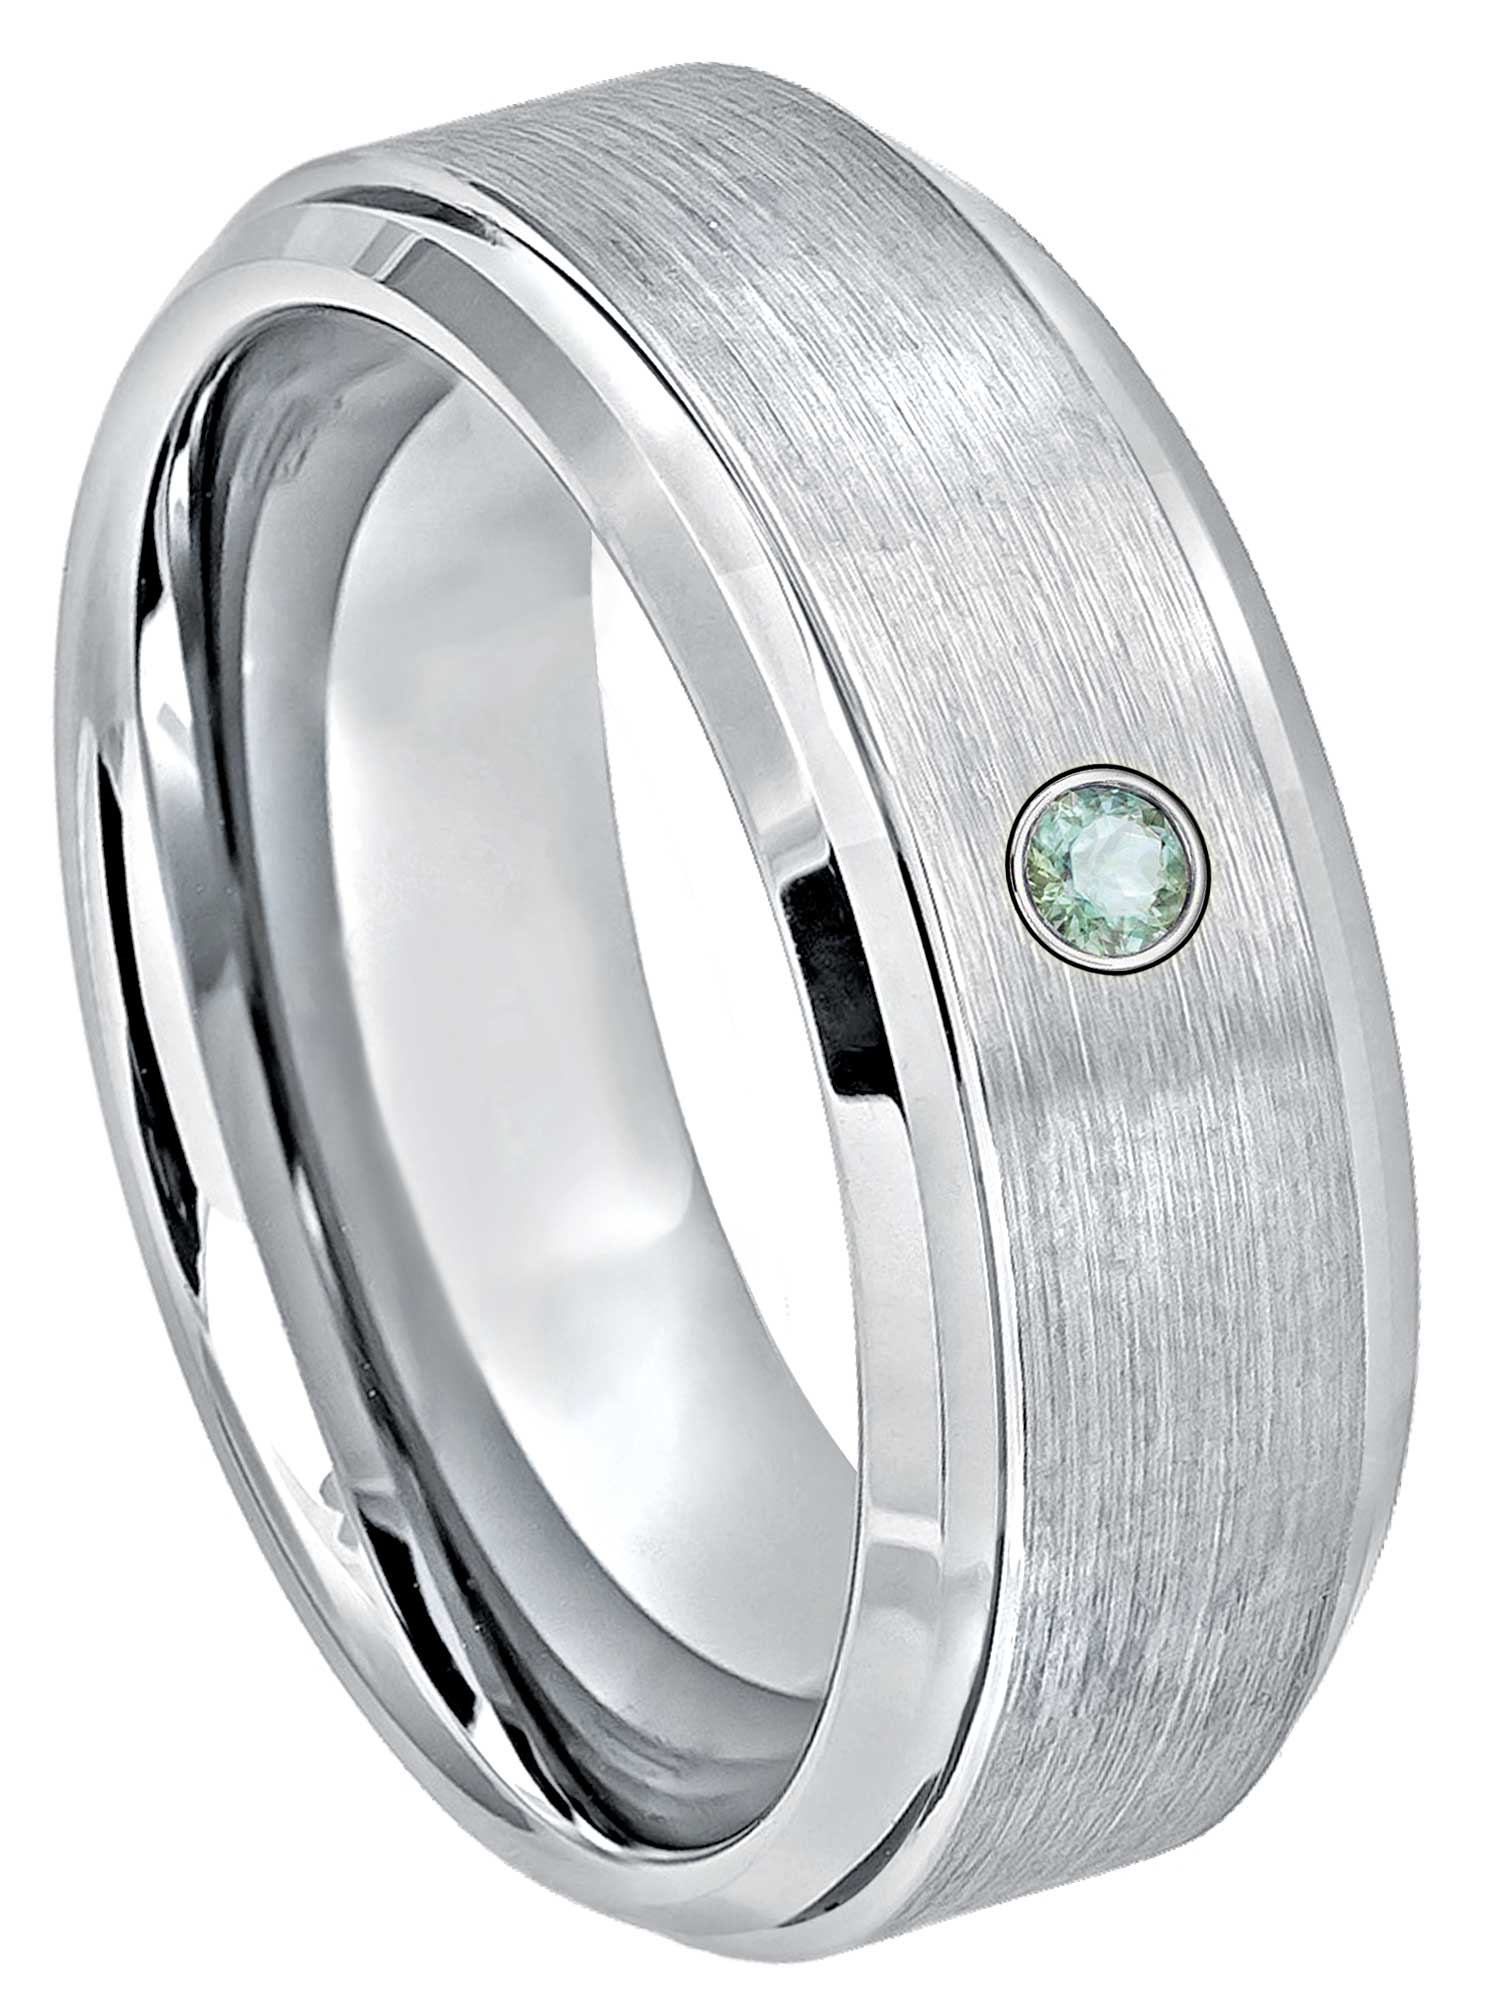 JEWELRY AVALANCHE 8mm Cobalt Ring Mens Wedding Band - 0.07ct Aquamarine Ring - March Birthstone Ring